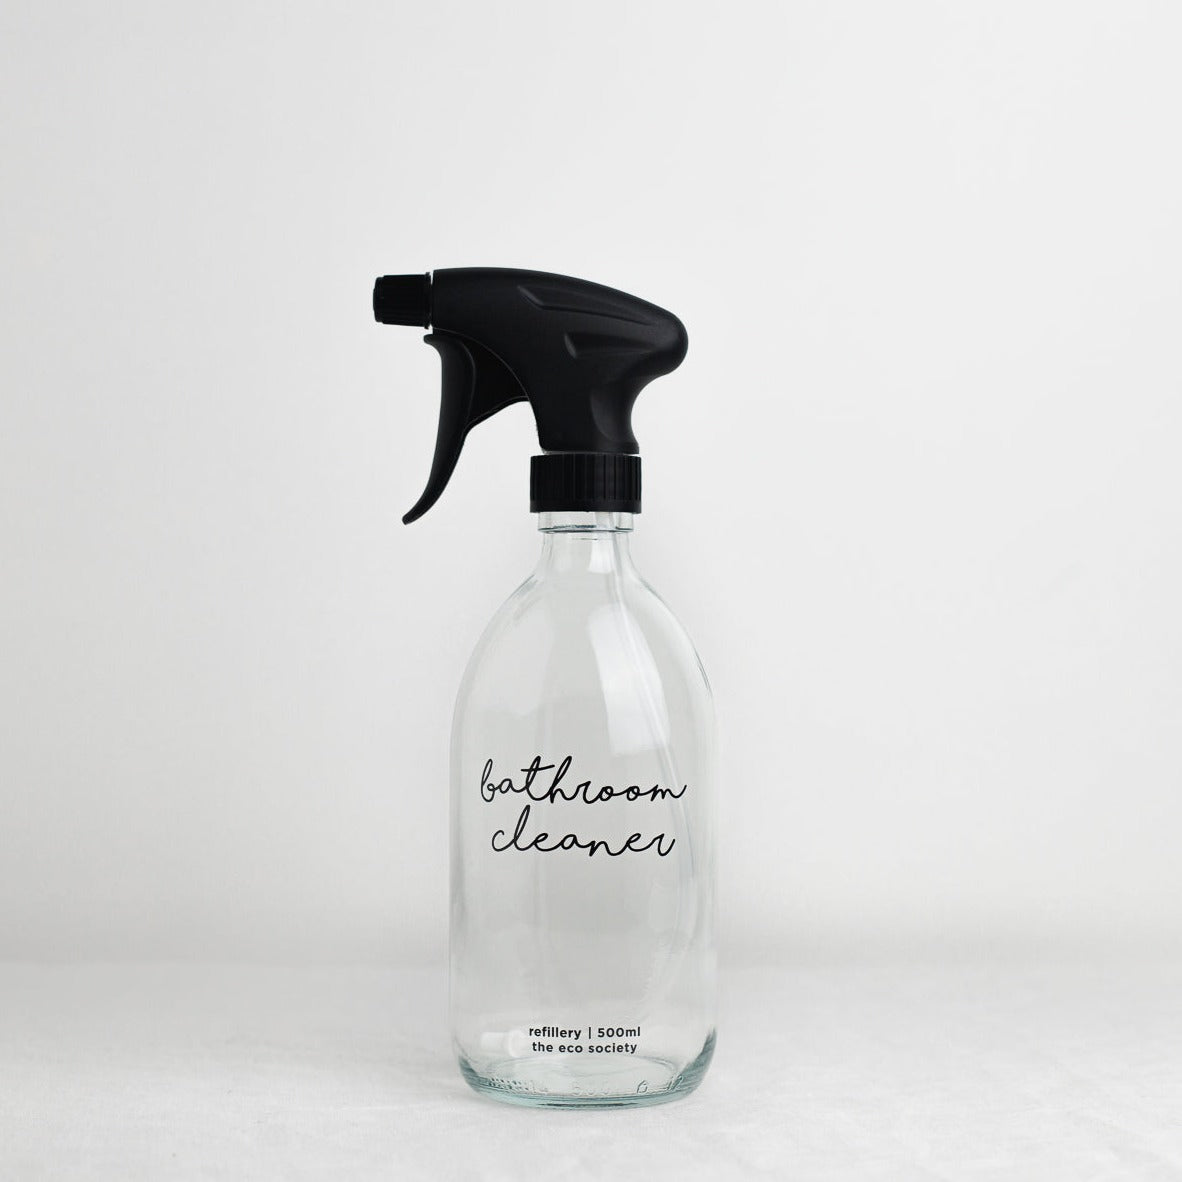 Clear Glass Bottle with Black printed text "Bathroom Cleaner" 500ml Refillery Bottle